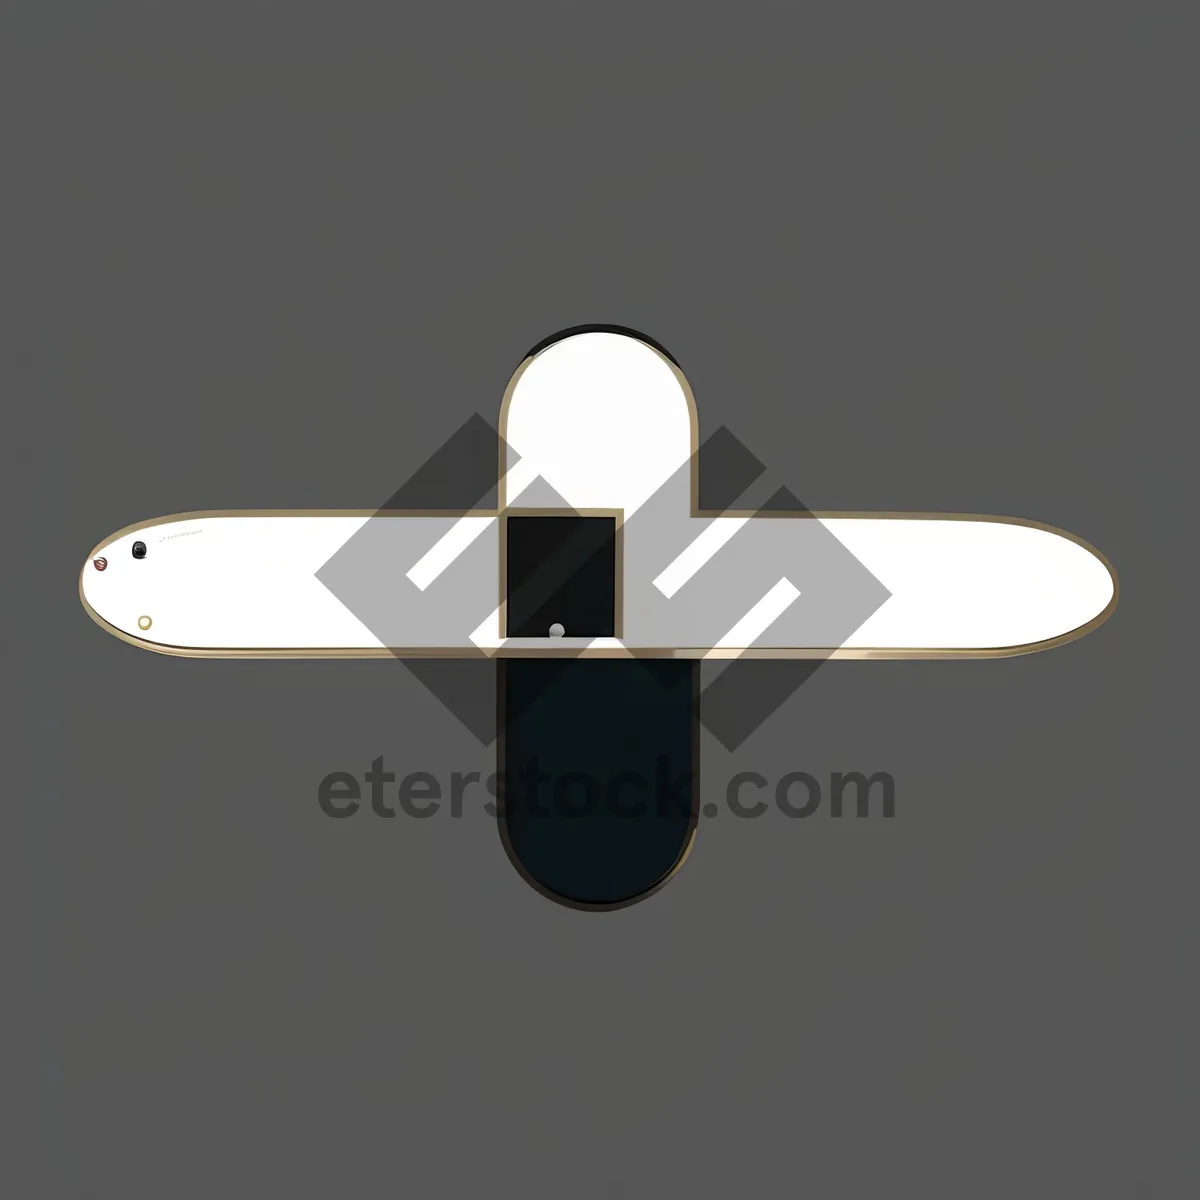 Picture of 3D Mechanical Device Icon for Business Signage